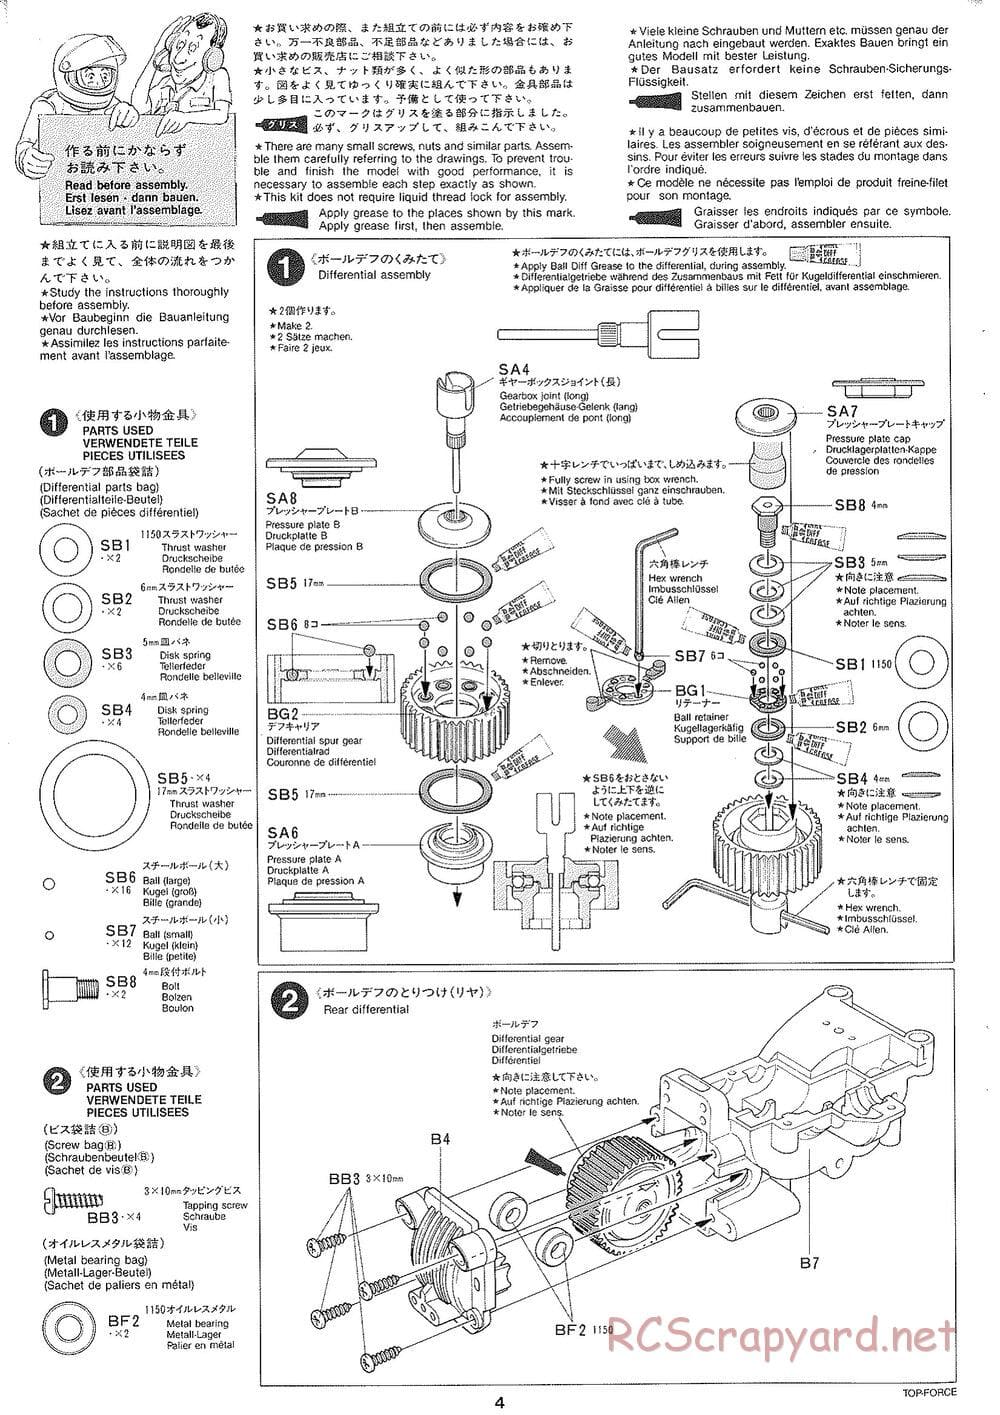 Tamiya - Top Force 2005 - DF-01 Chassis - Manual - Page 4